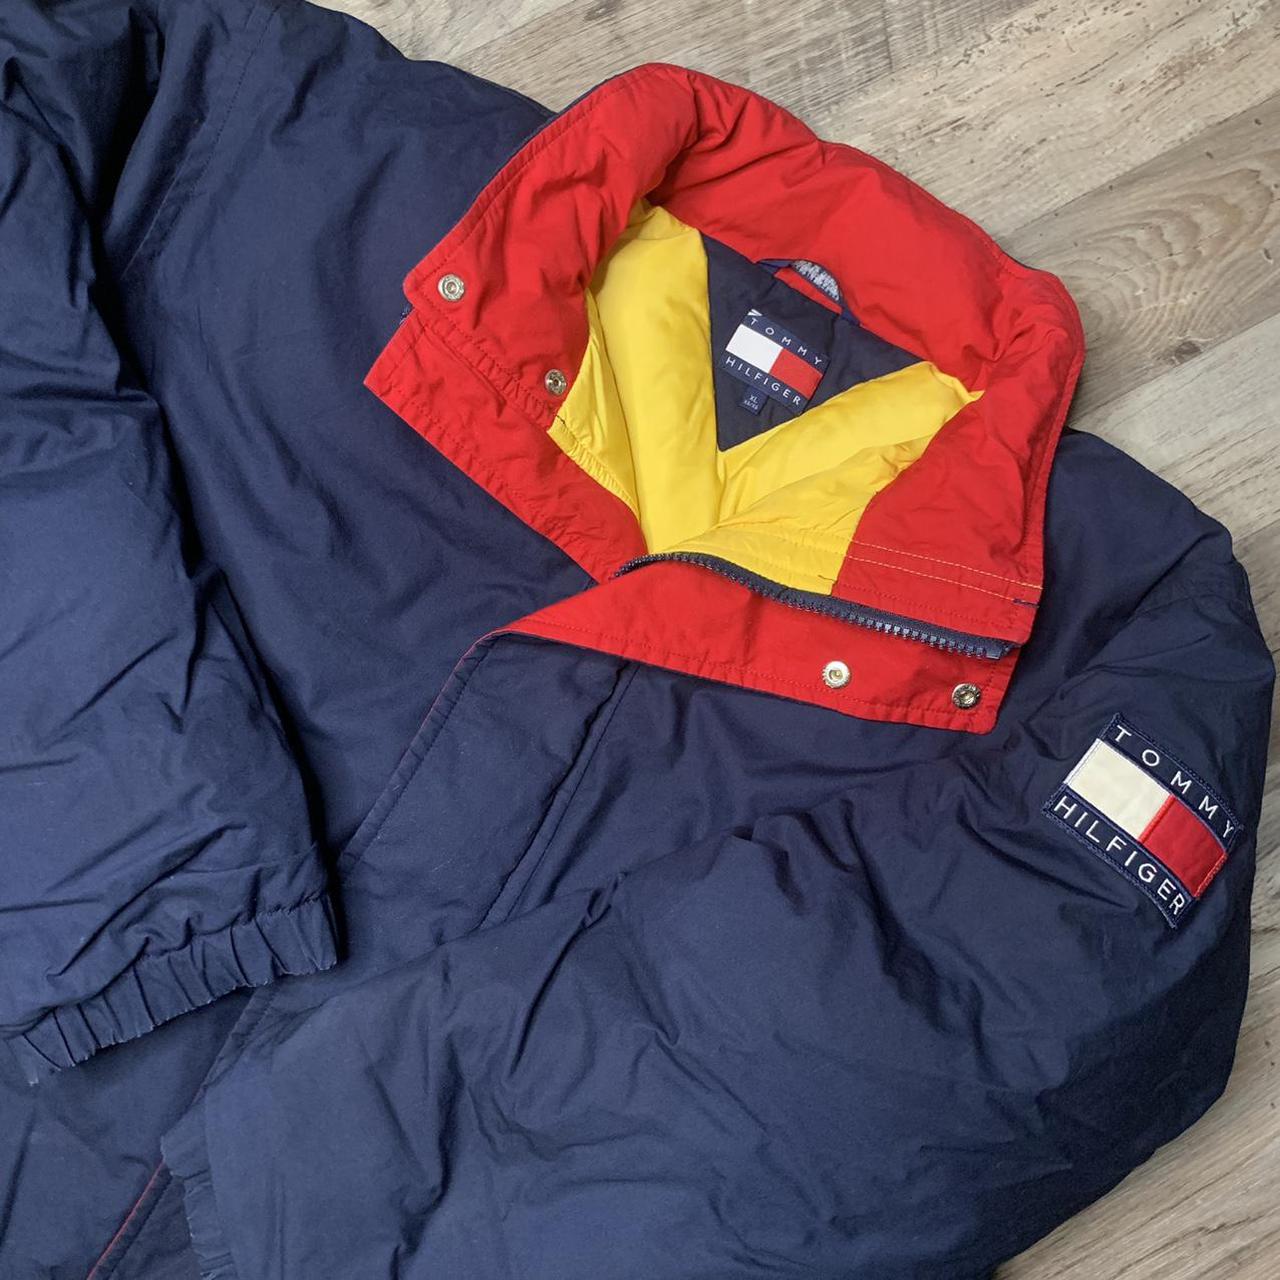 Tommy Hilfiger Men's Navy and Red Jacket